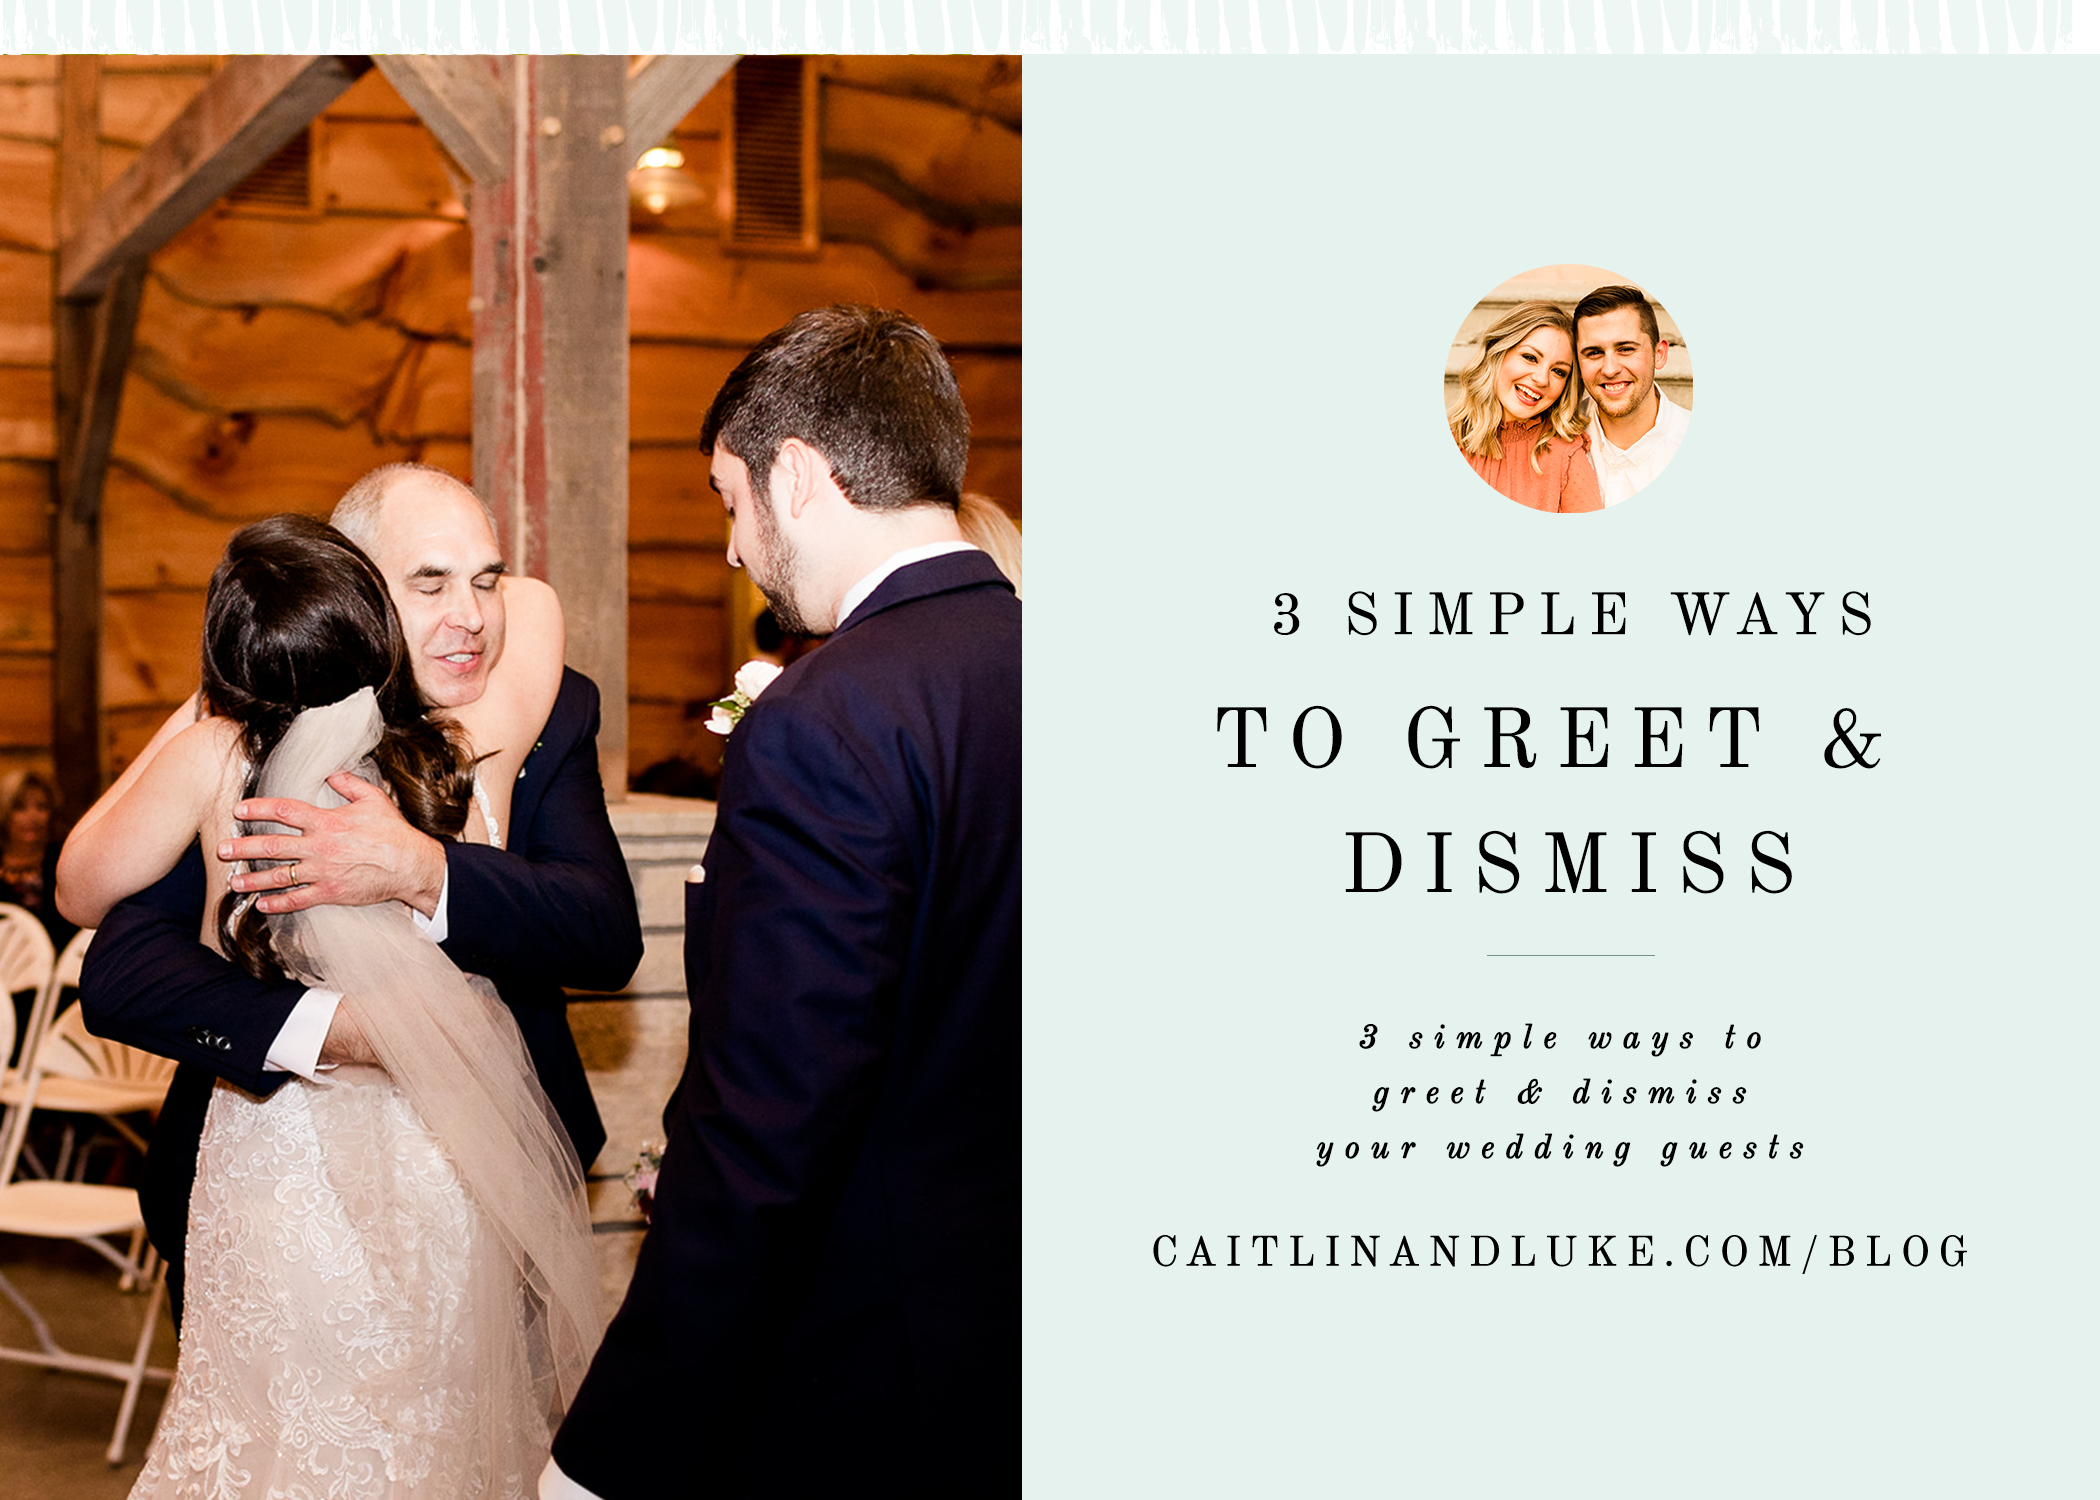 3 simple ways to greet and dismiss guests